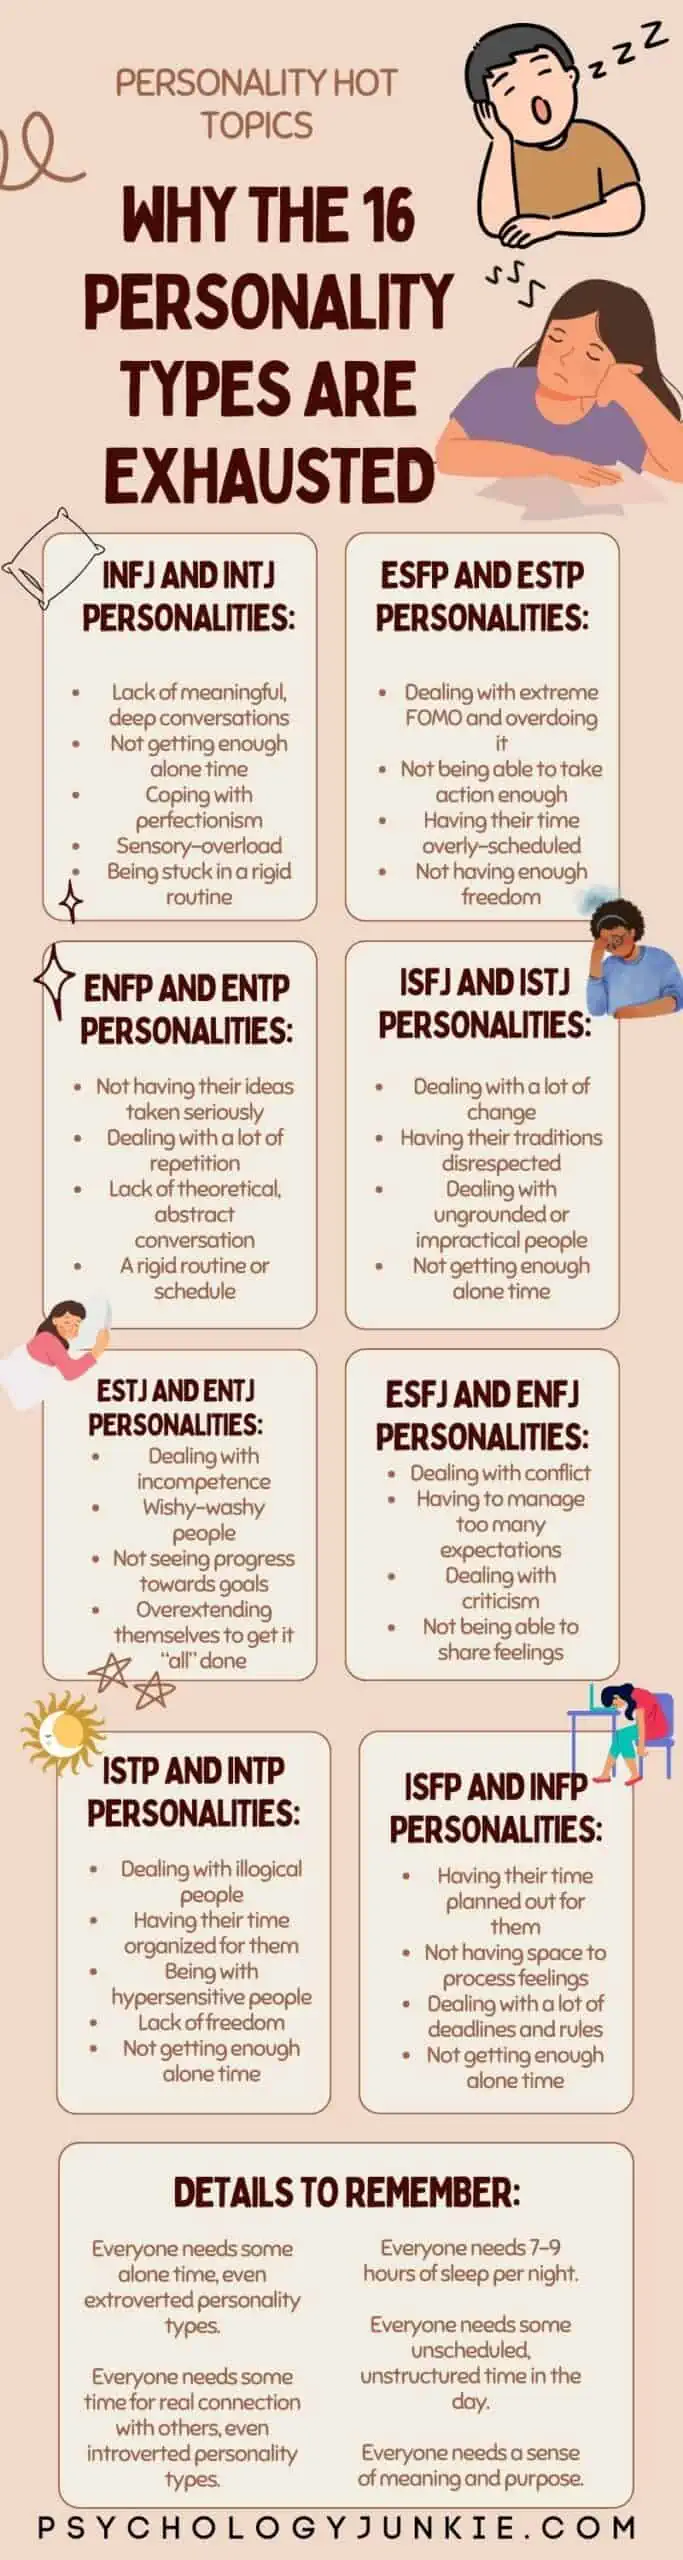 An infographic describing why all the 16 personality types are exhausted. #MBTI #INFP